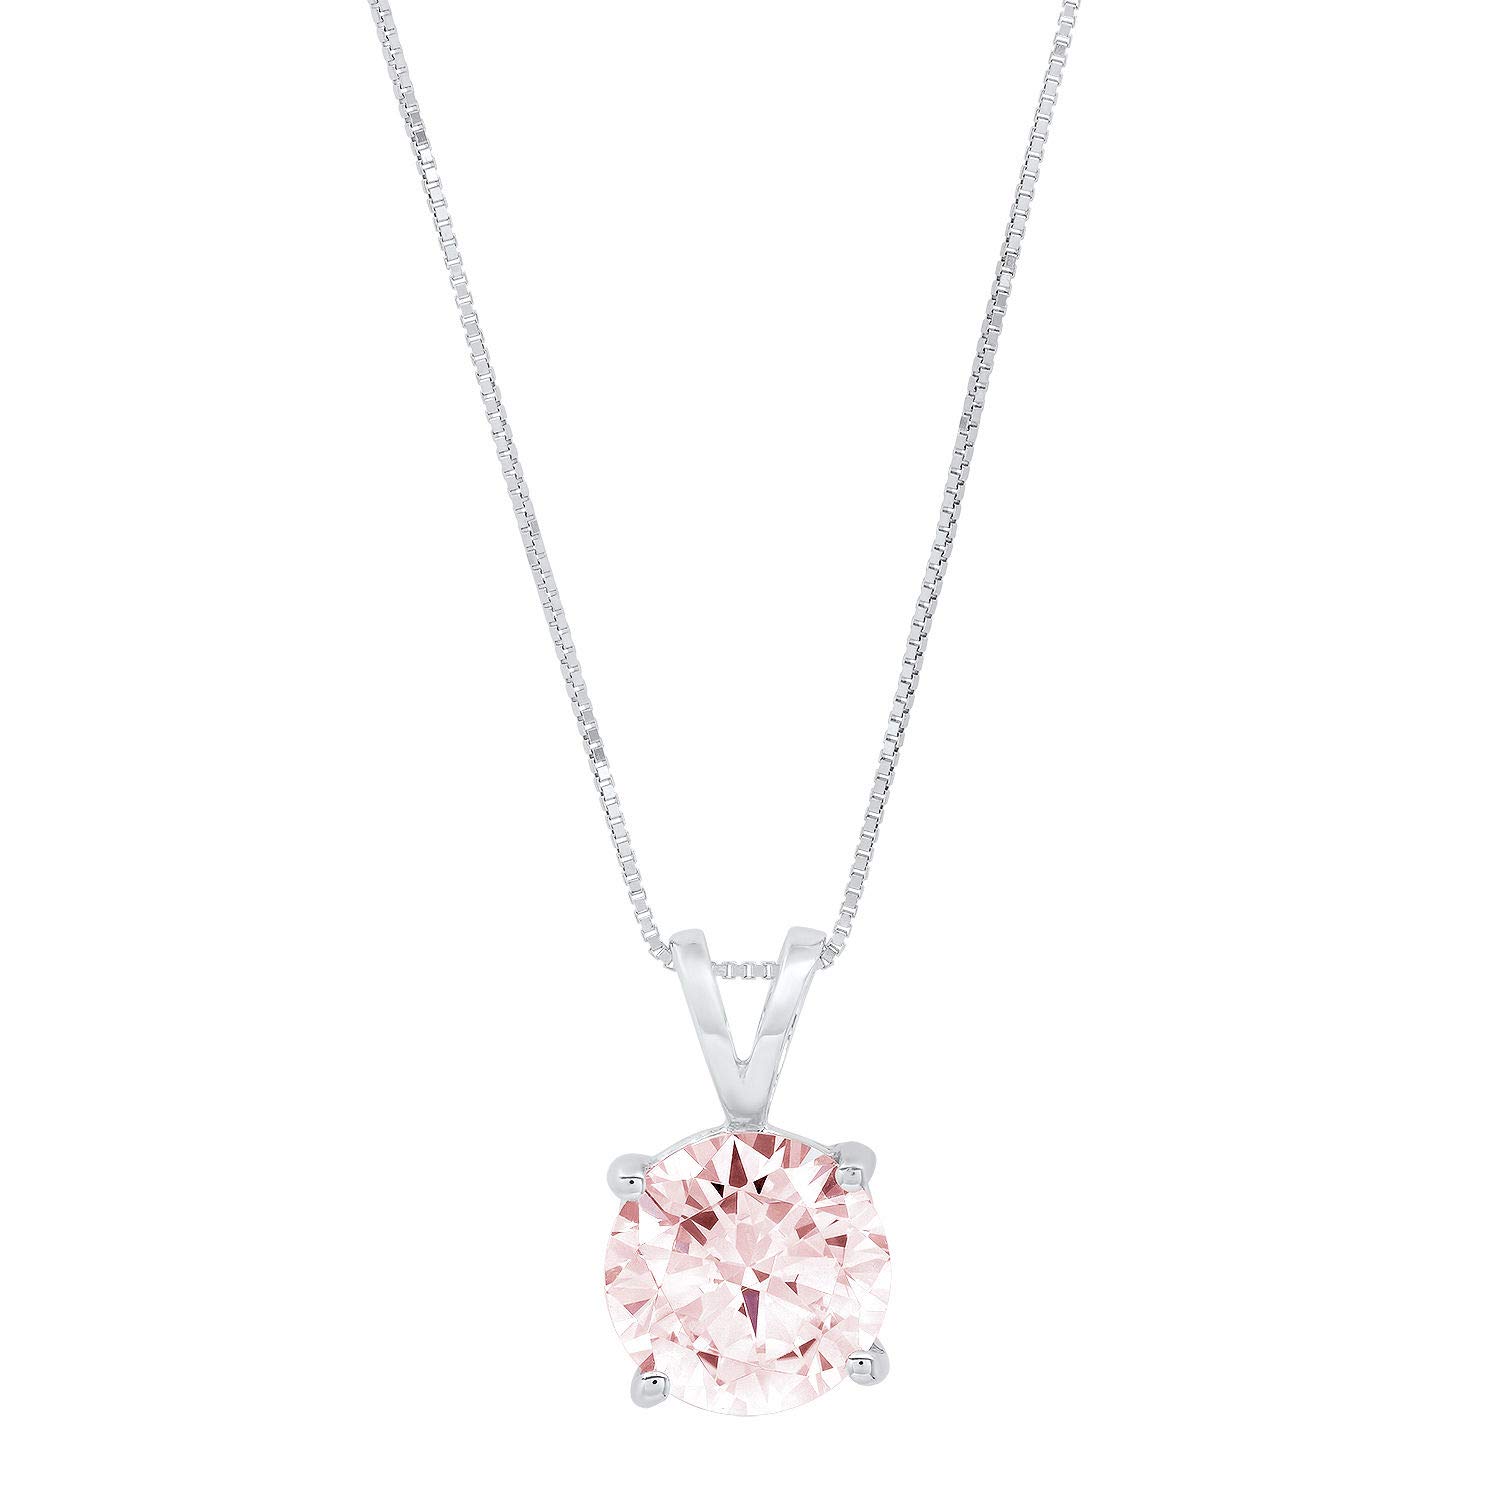 Clara Pucci 1.50 ct Brilliant Round Cut Stunning Genuine Flawless Pink Simulated Diamond Gemstone Solitaire Pendant Necklace With 18